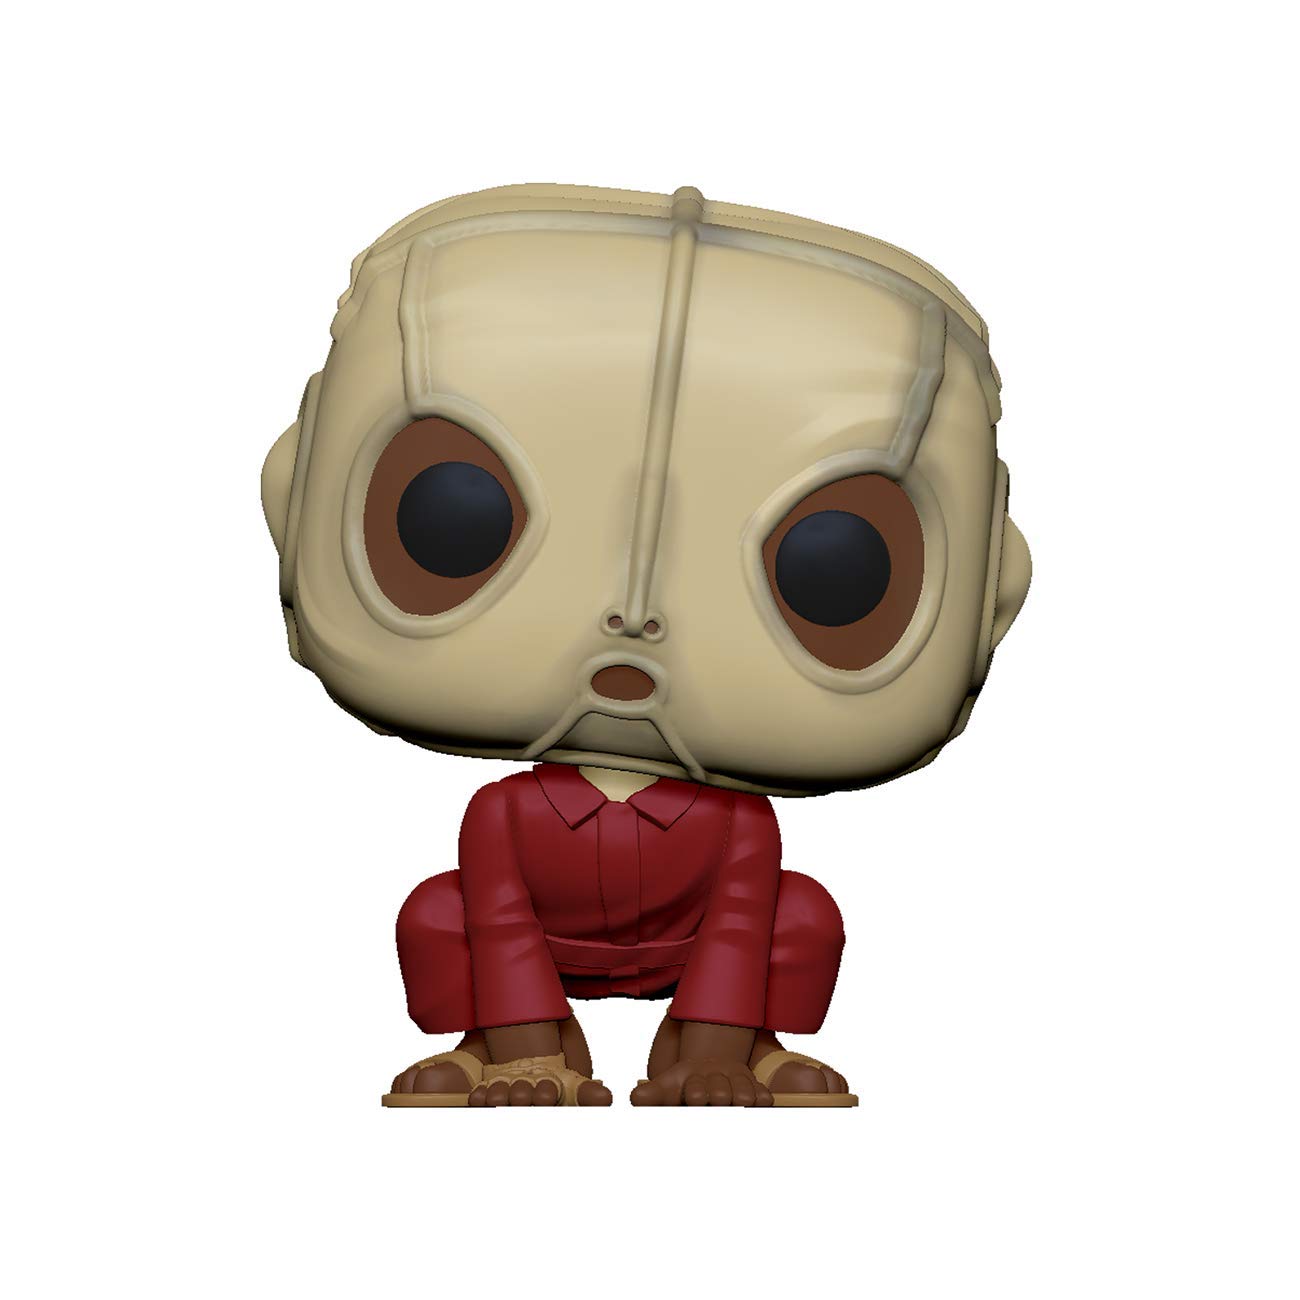 Funko POP! Movies: Us - Pluto with Mask (Styles May Vary)